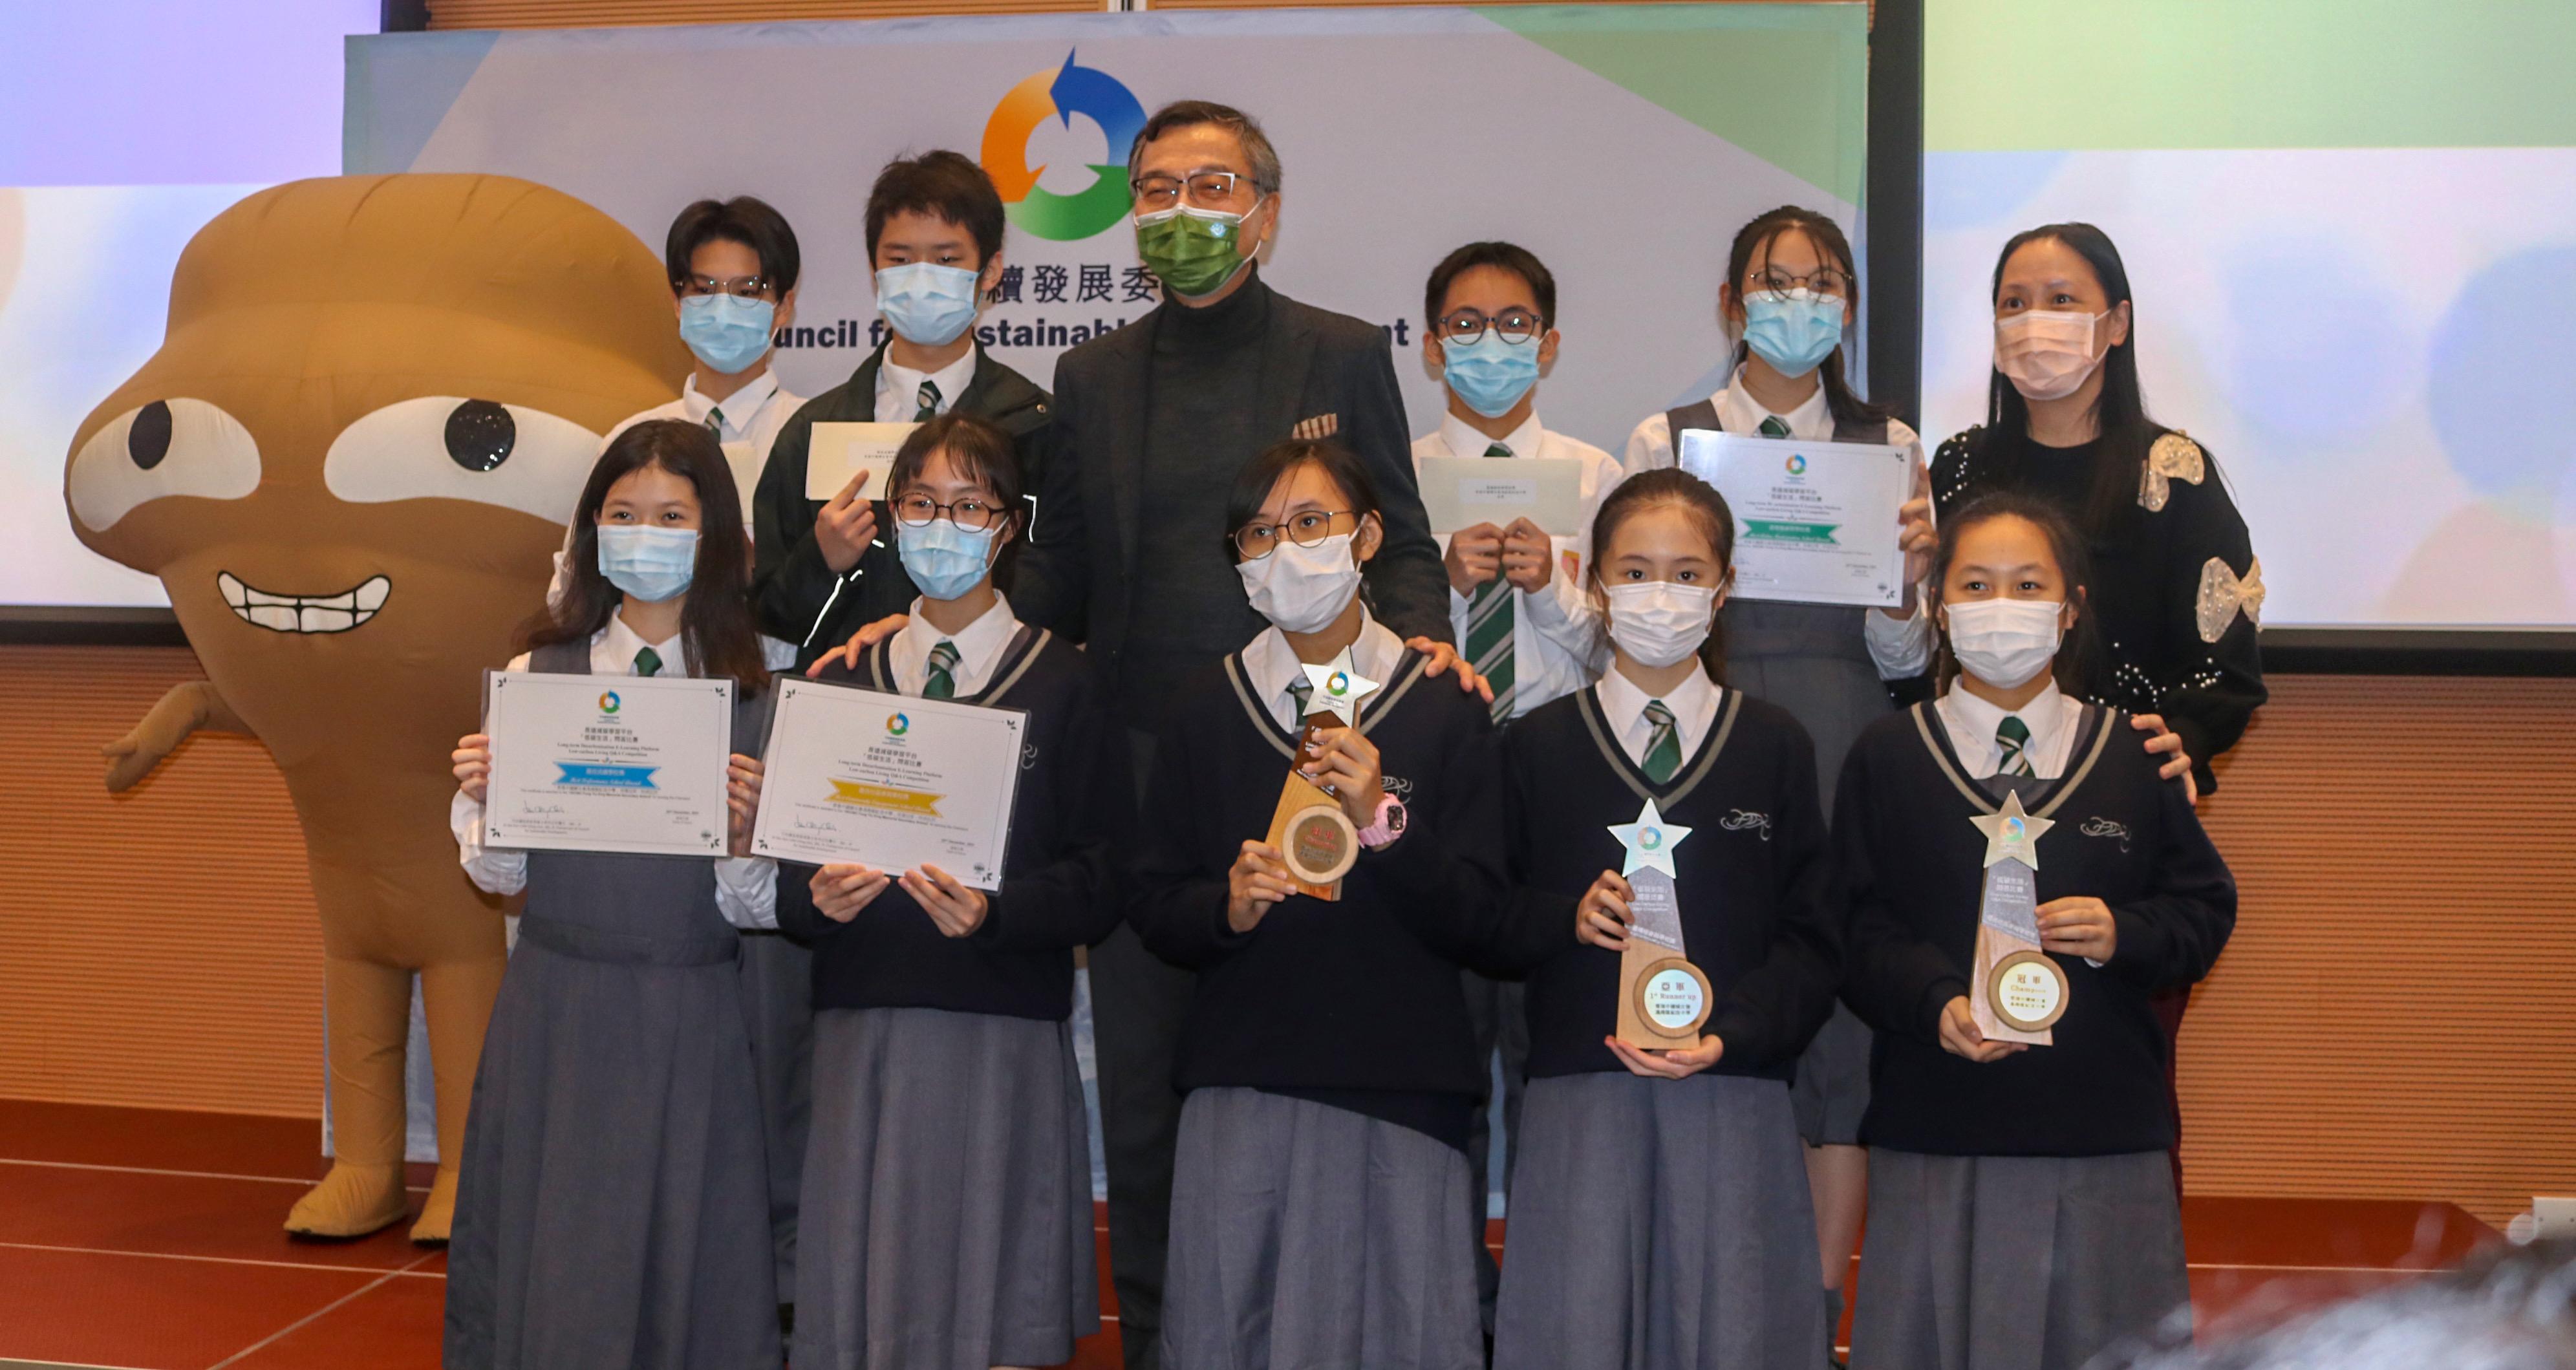 The prize presentation ceremony of the Low-Carbon Living Online Quiz was held today (December 22) to recognise students' active participation and promotion of the messages of sustainable development and low-carbon living in the community. Picture shows the Chairman of Council for Sustainable Development, Dr Lam Ching-choi (back row, centre), and the winning students.